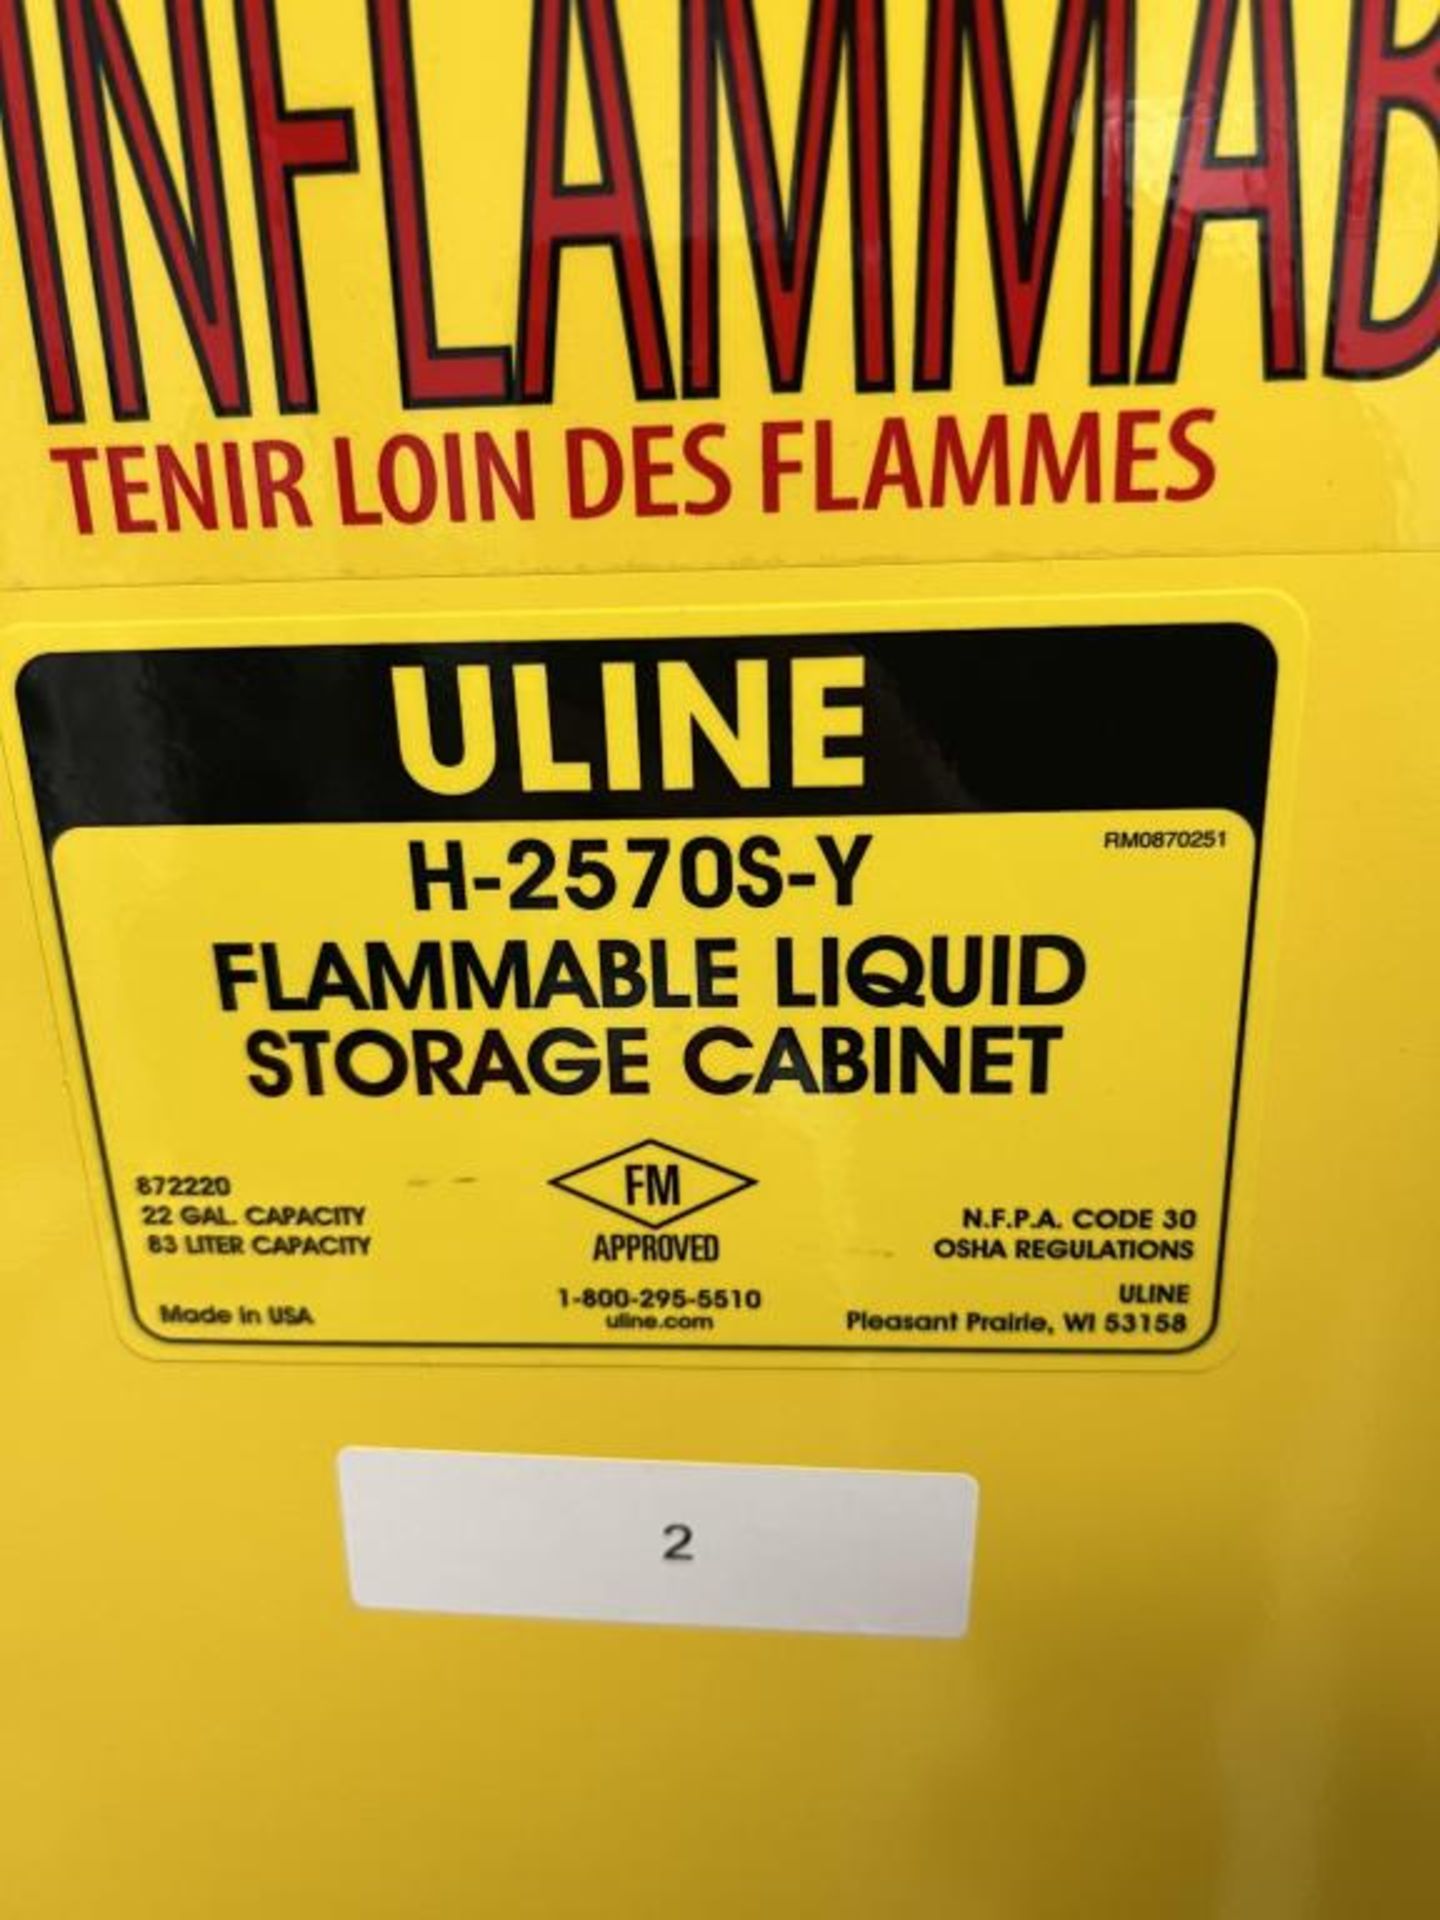 Flammable Storage Cabinet - Image 2 of 2